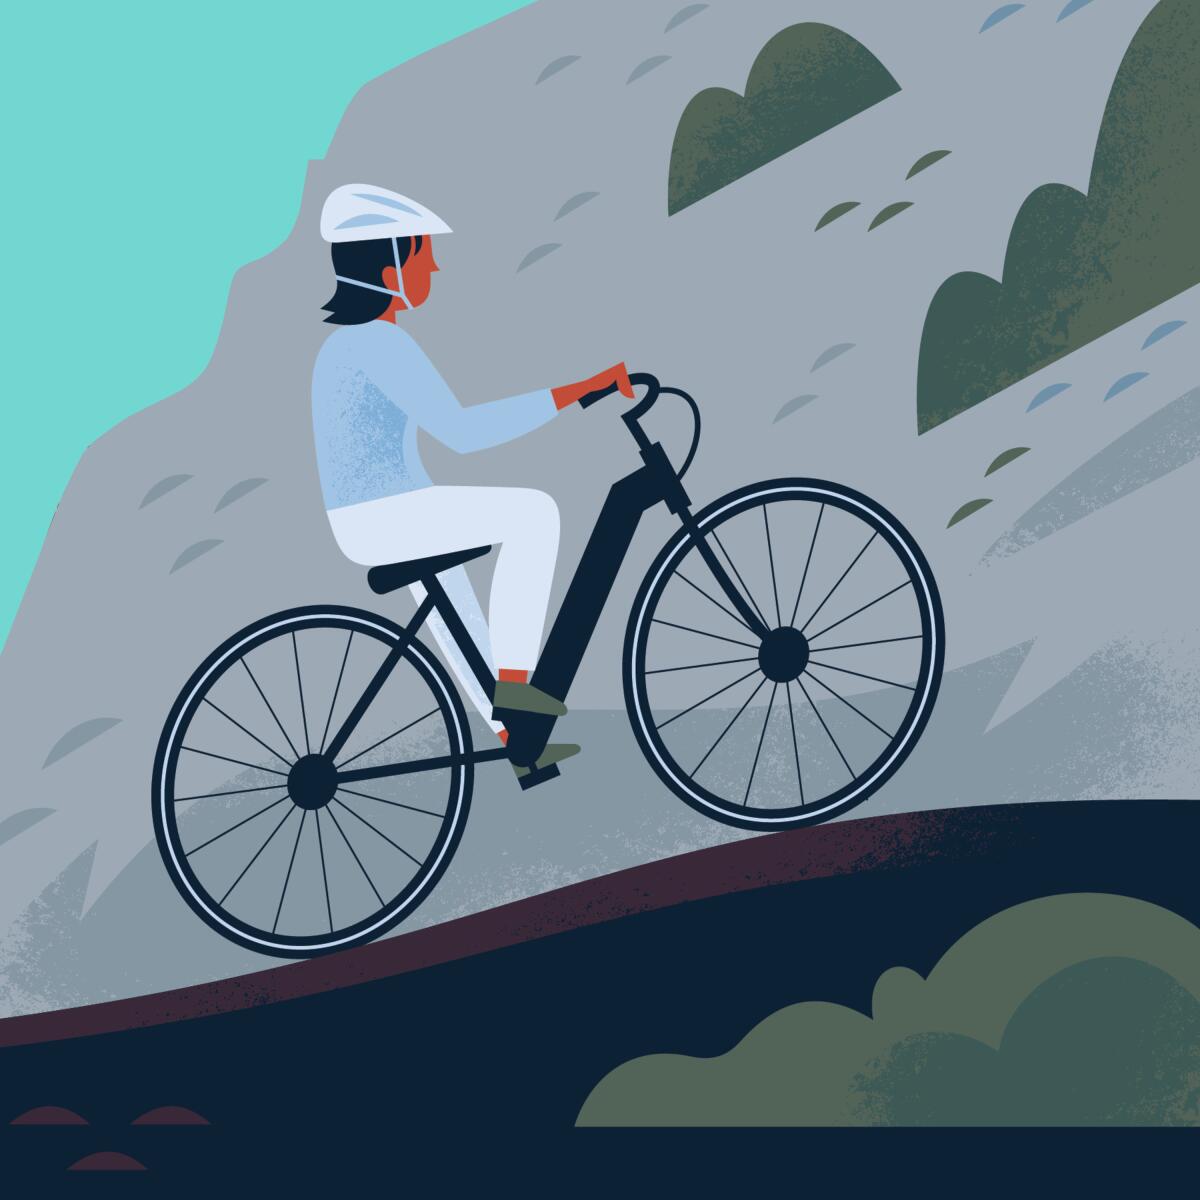 An illustration of a person on a bicycle